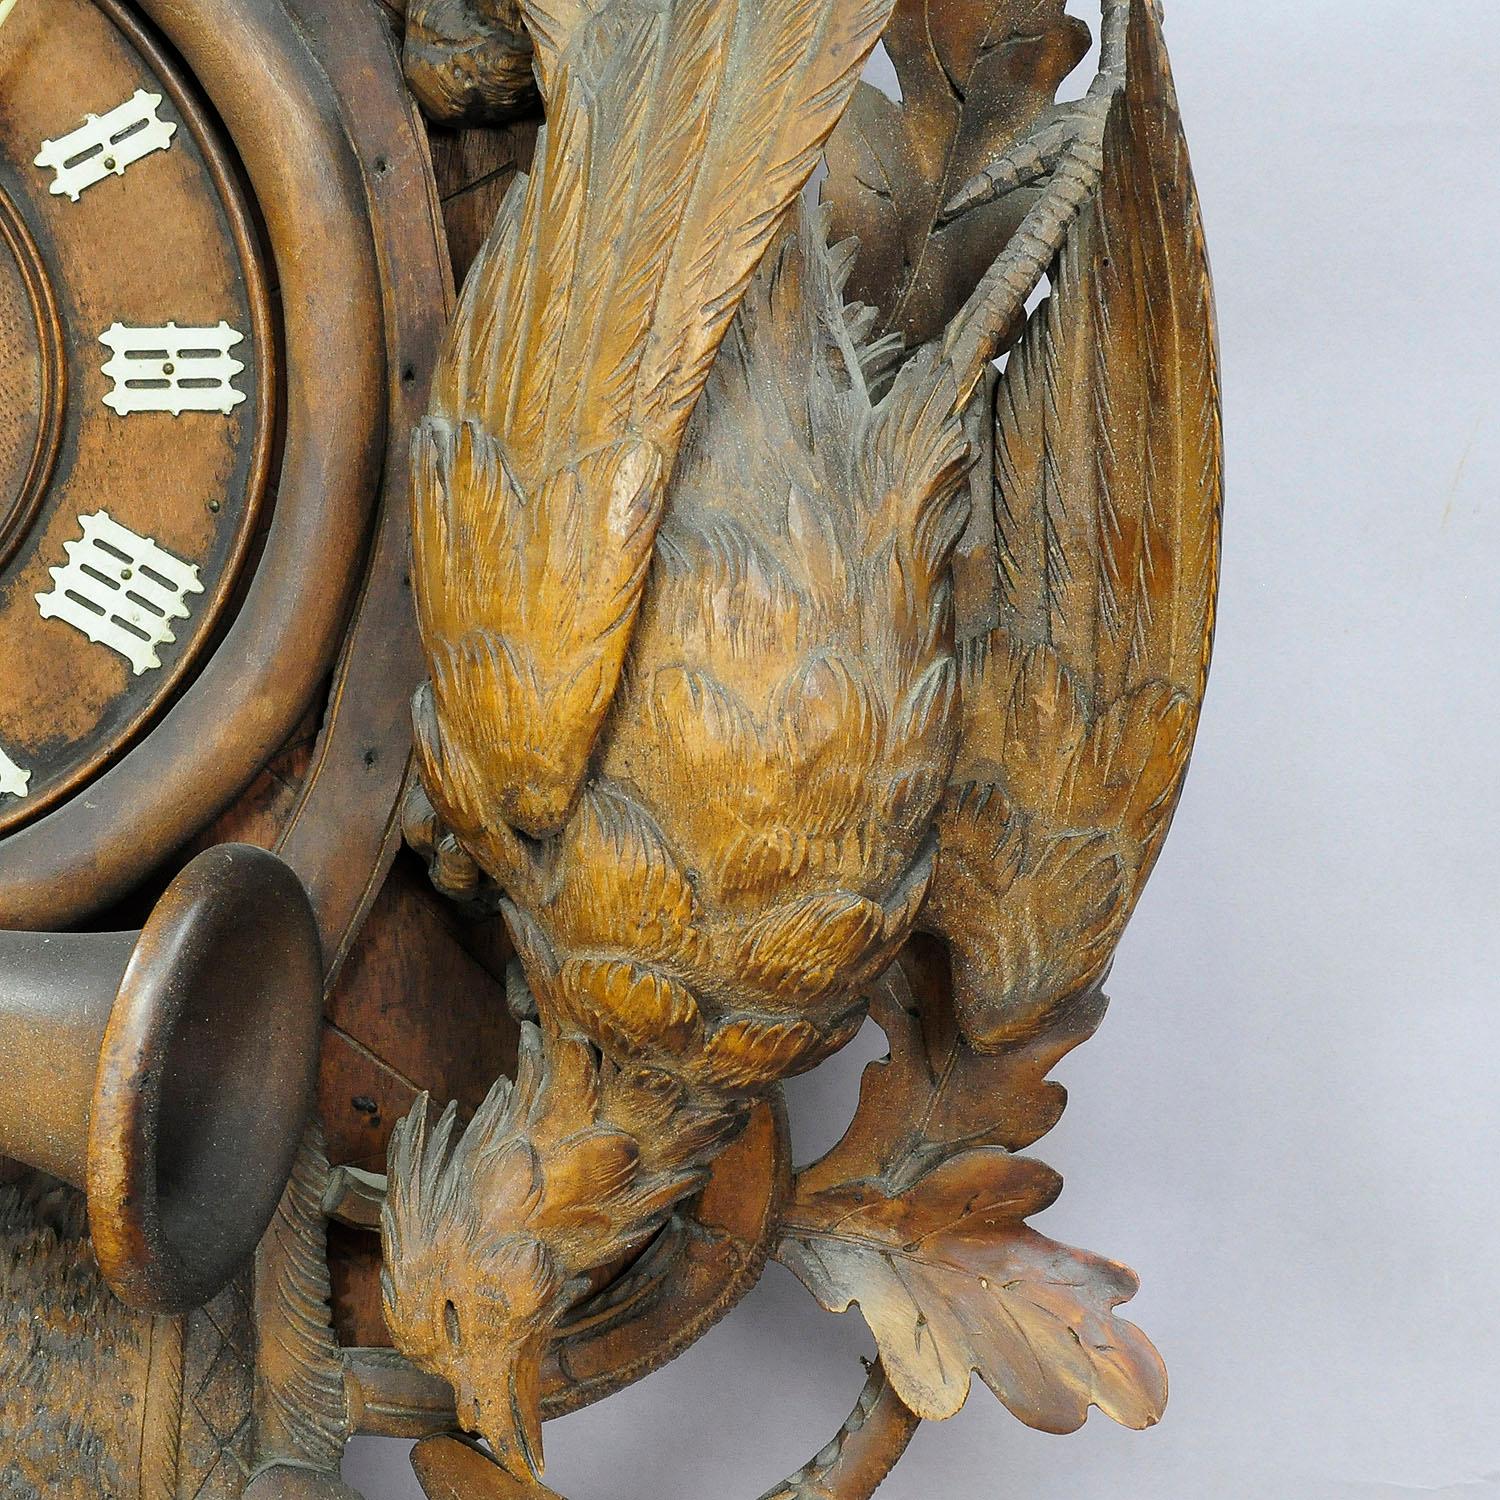 German Black Forest Carved Wood Cuckoo Clock with Large Stag Head